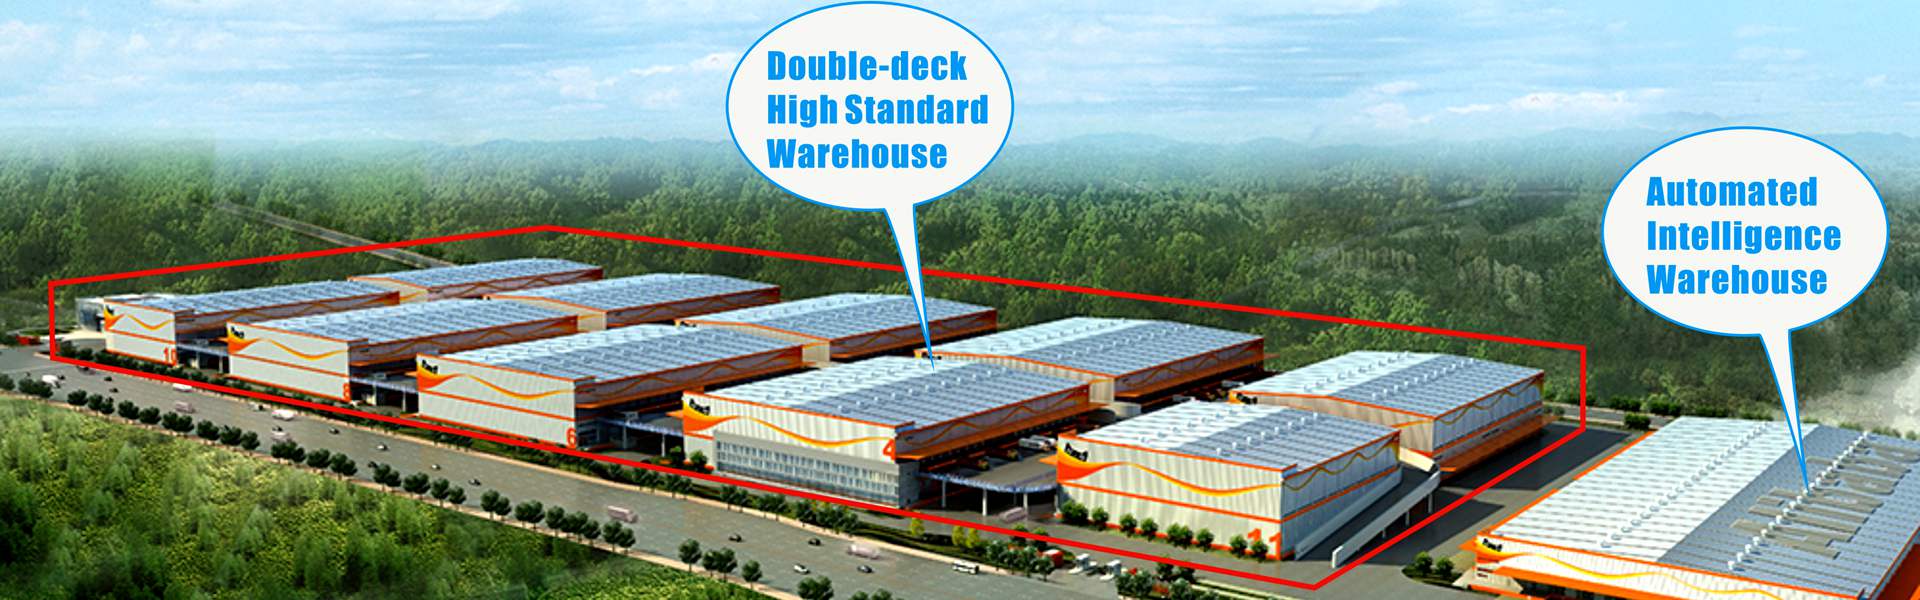 Alibaba Group (Cayman Islands): Two-storied High Standard Steel Structure Warehouses and Automated Intelligence Warehouses - 8840 Sqm